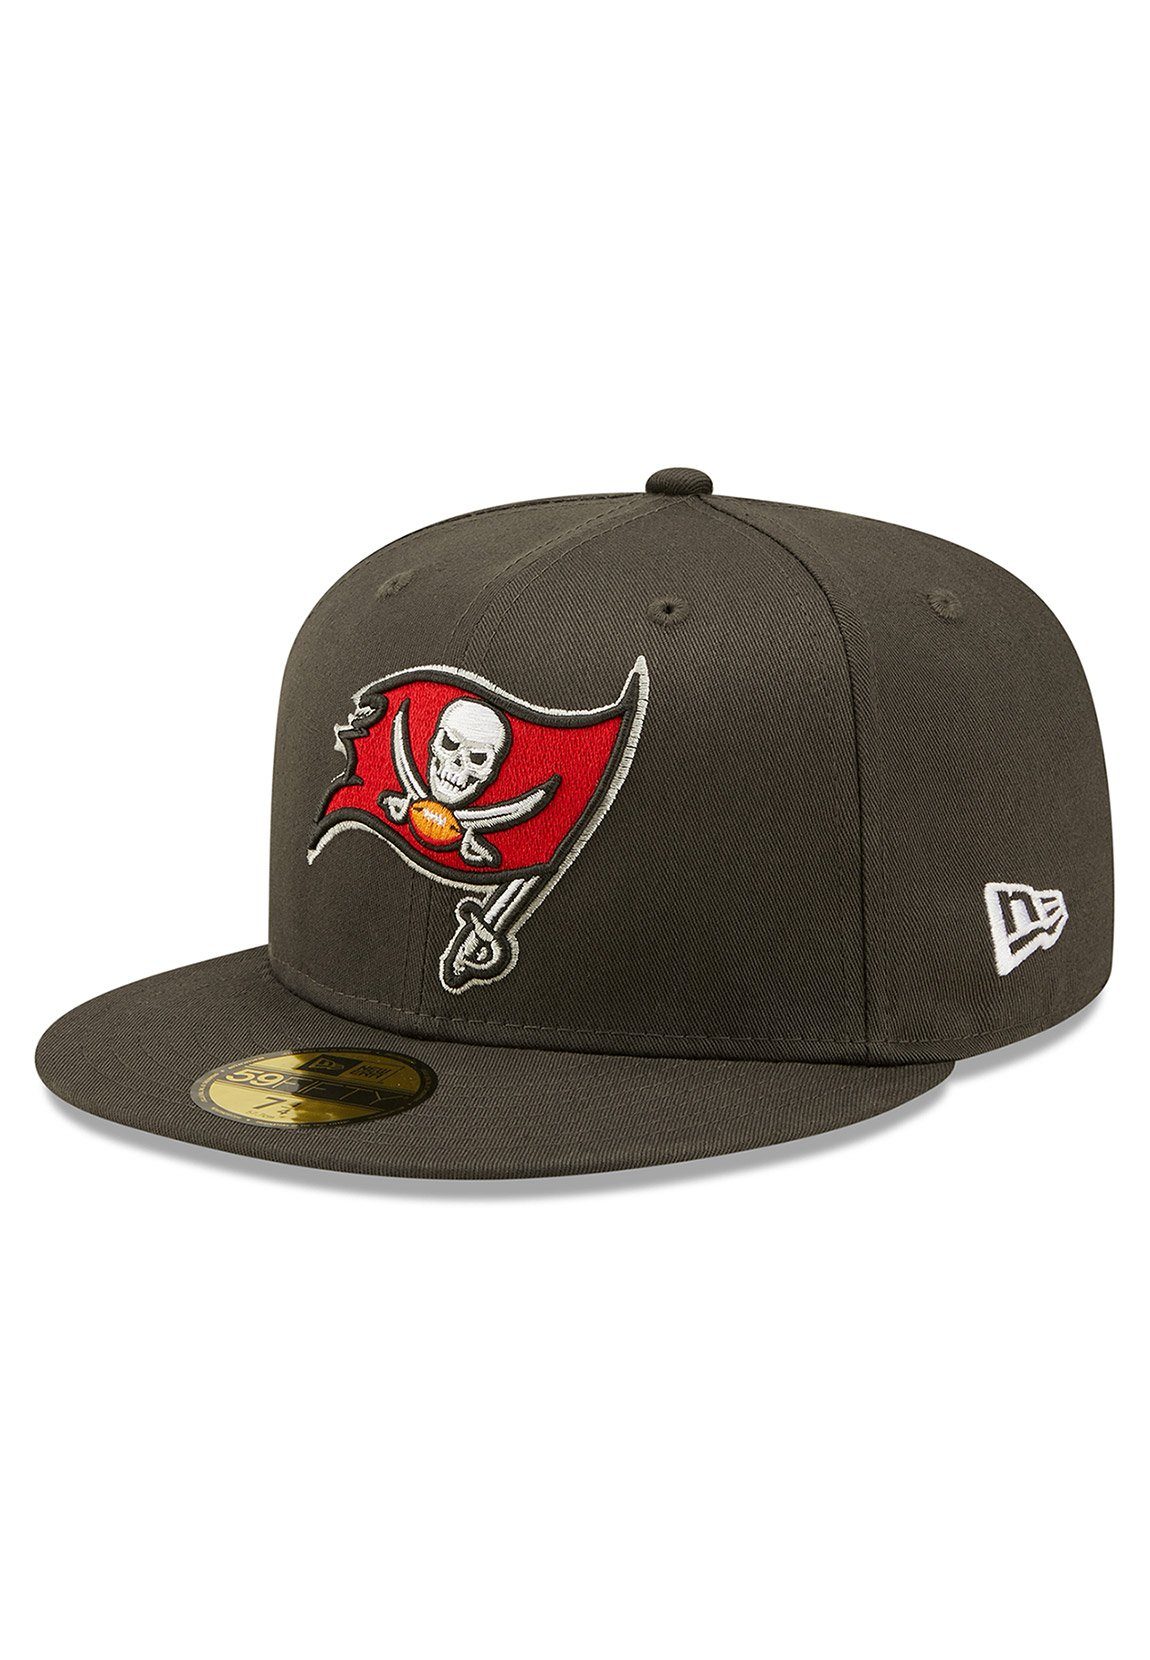 Patch Fitted Cap Grau New TAMPA BAY Era New Side Charcoal 59Fifty BUCCANEERS